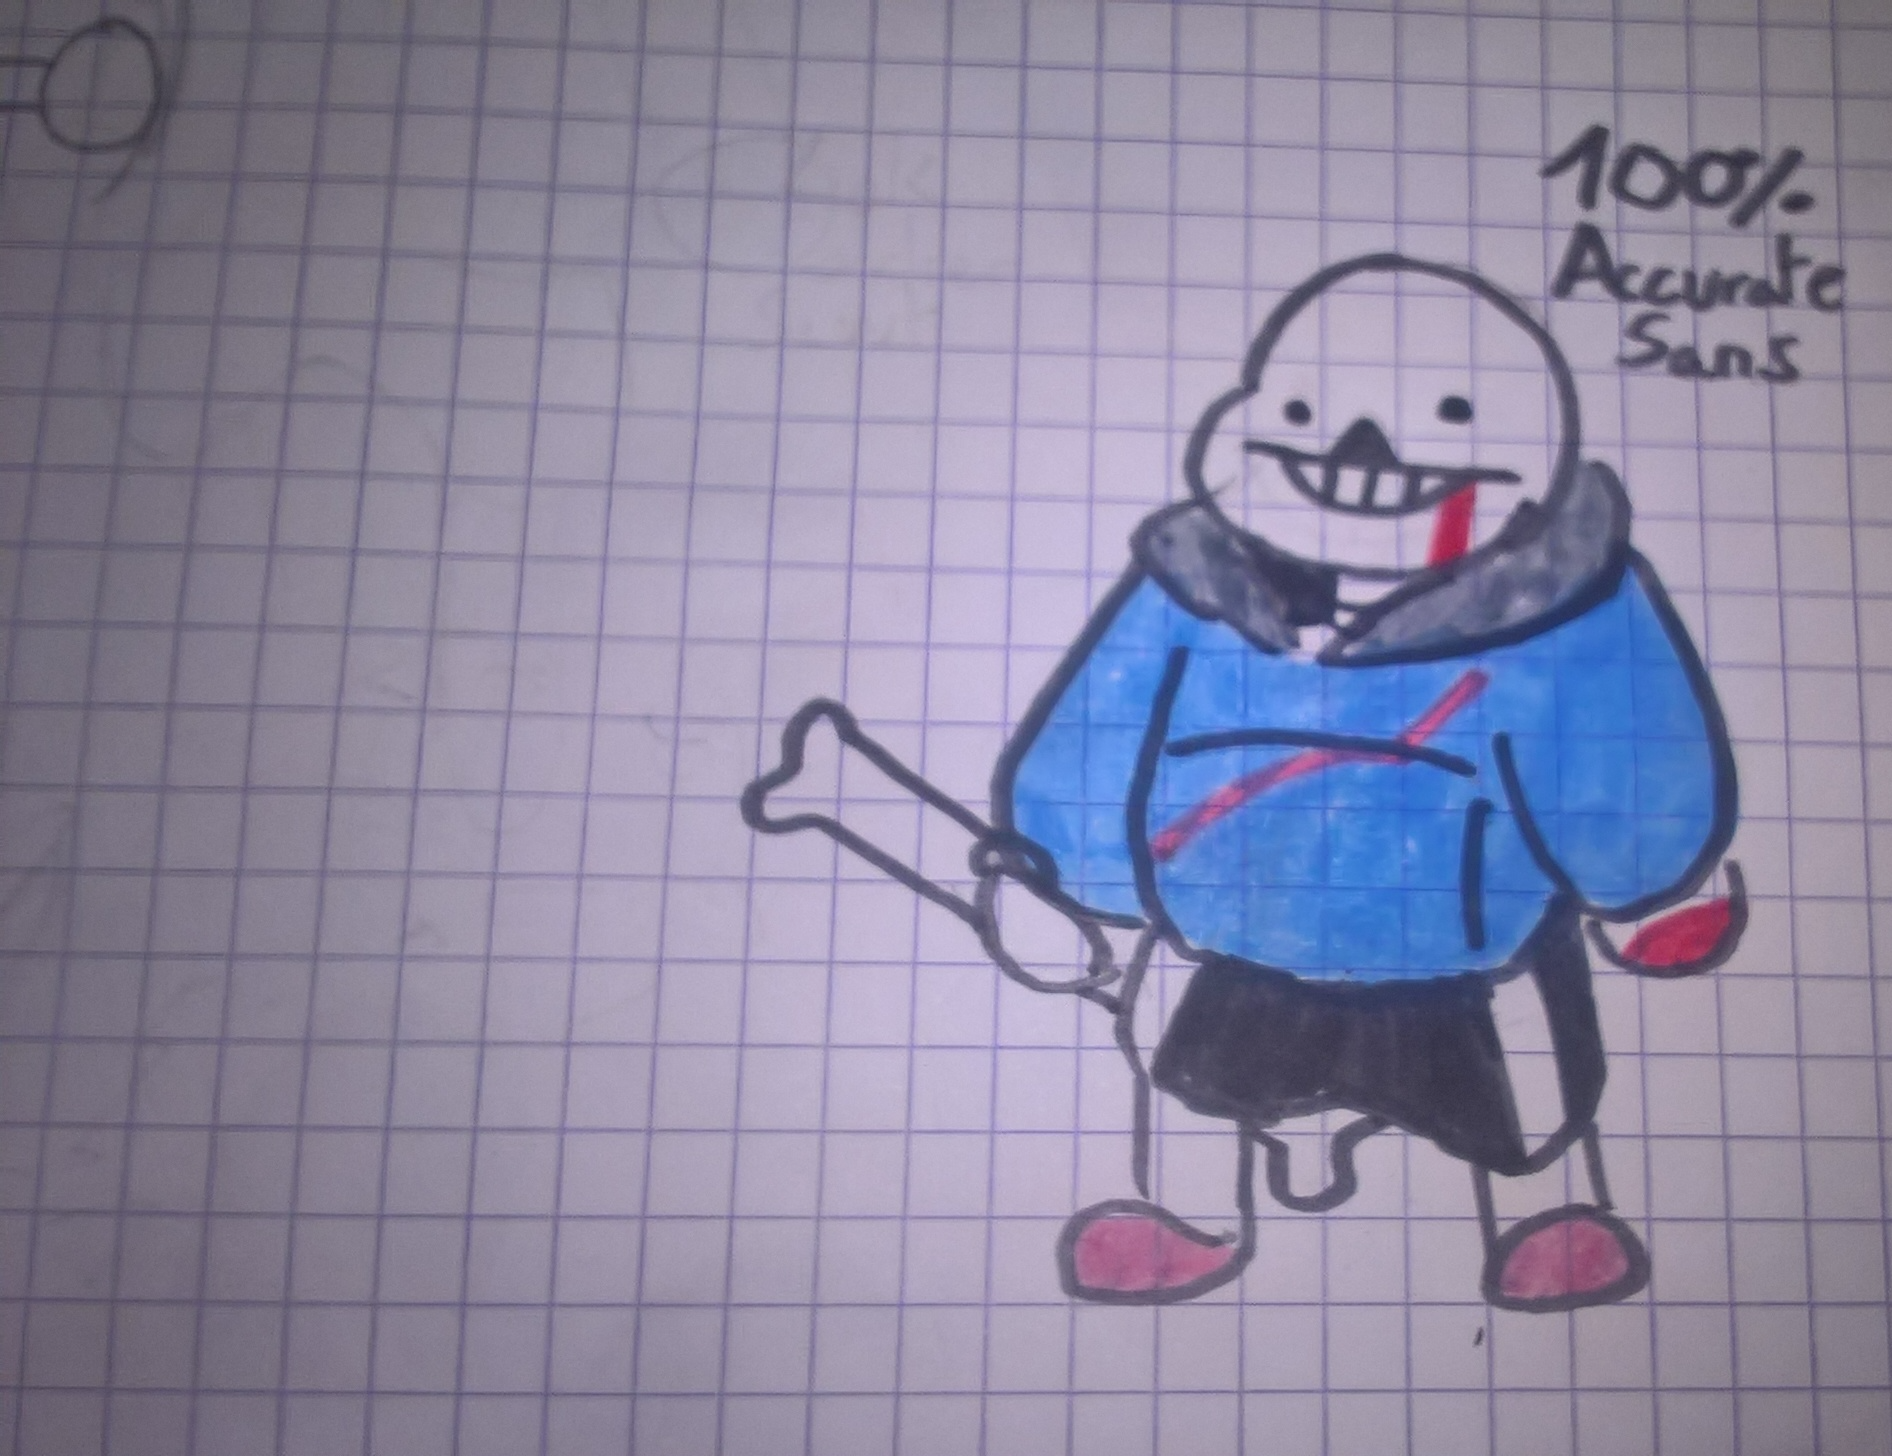 High Quality 100% accurate sans Blank Meme Template